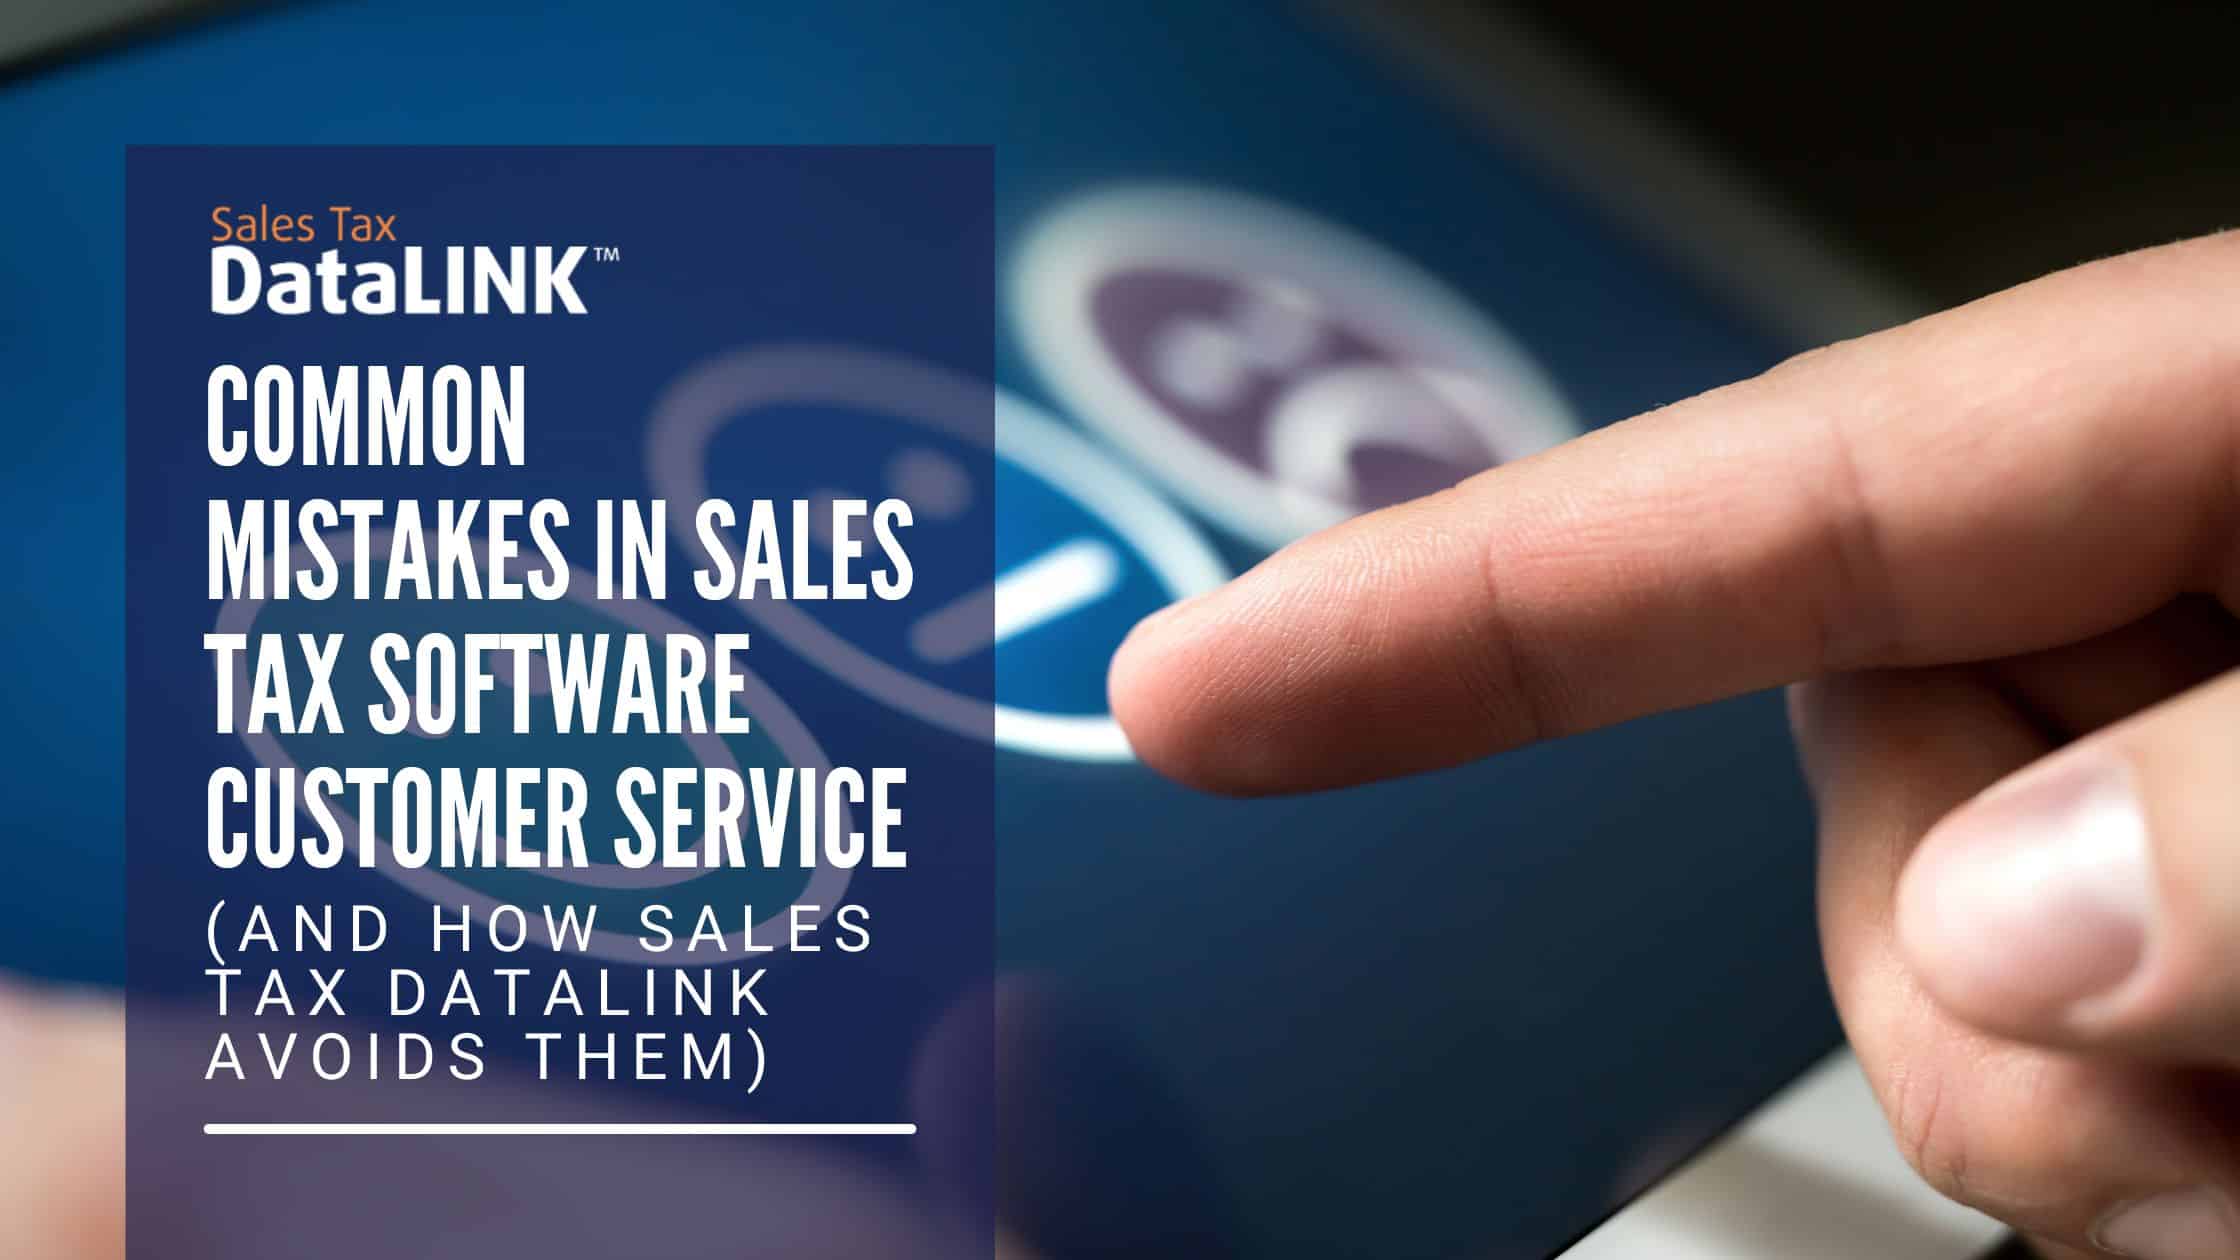 Common mistakes in sales tax software customer service